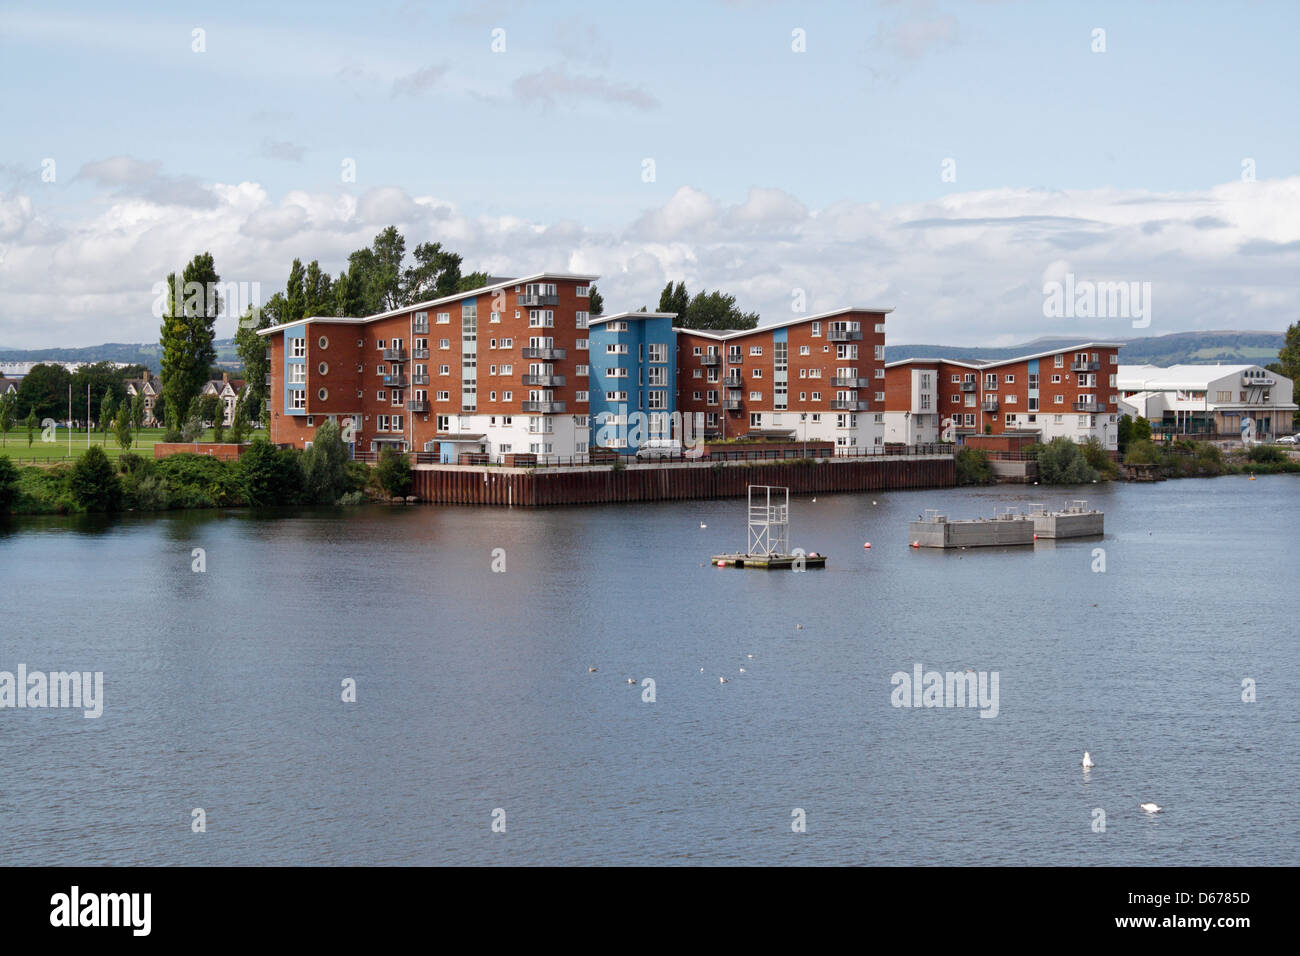 Riverside Housing in Cardiff overlooking the River Taff Stock Photo